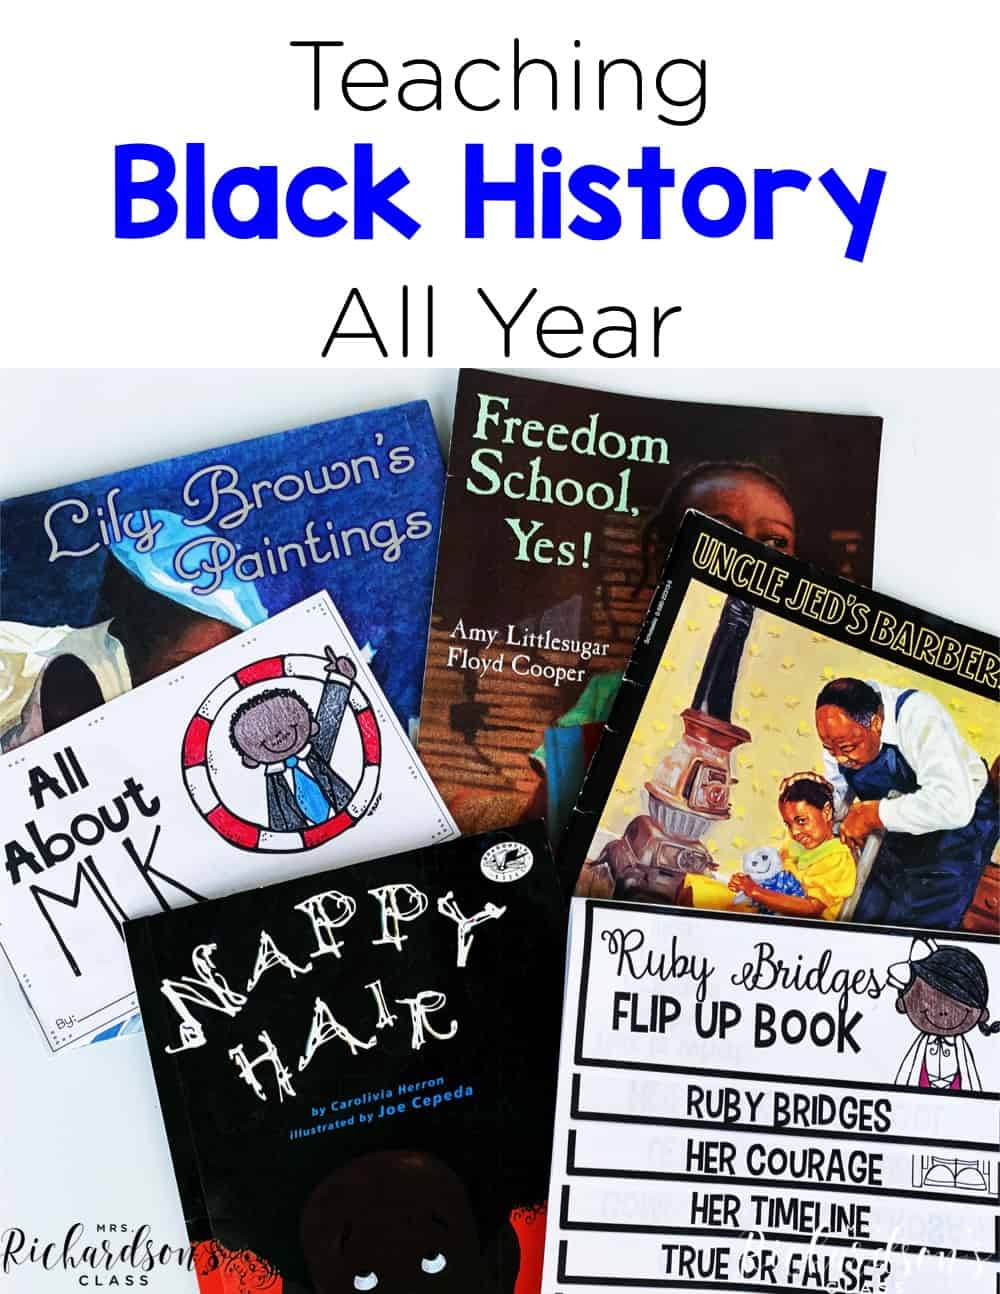 Are you looking for resources to start teaching about Black history all year? I have some great read alouds and simple engaging activities for your students as you talk about how beautiful the Black race and African culture is! Get started in your kindergarten and first grade classroom with these black history activities. 